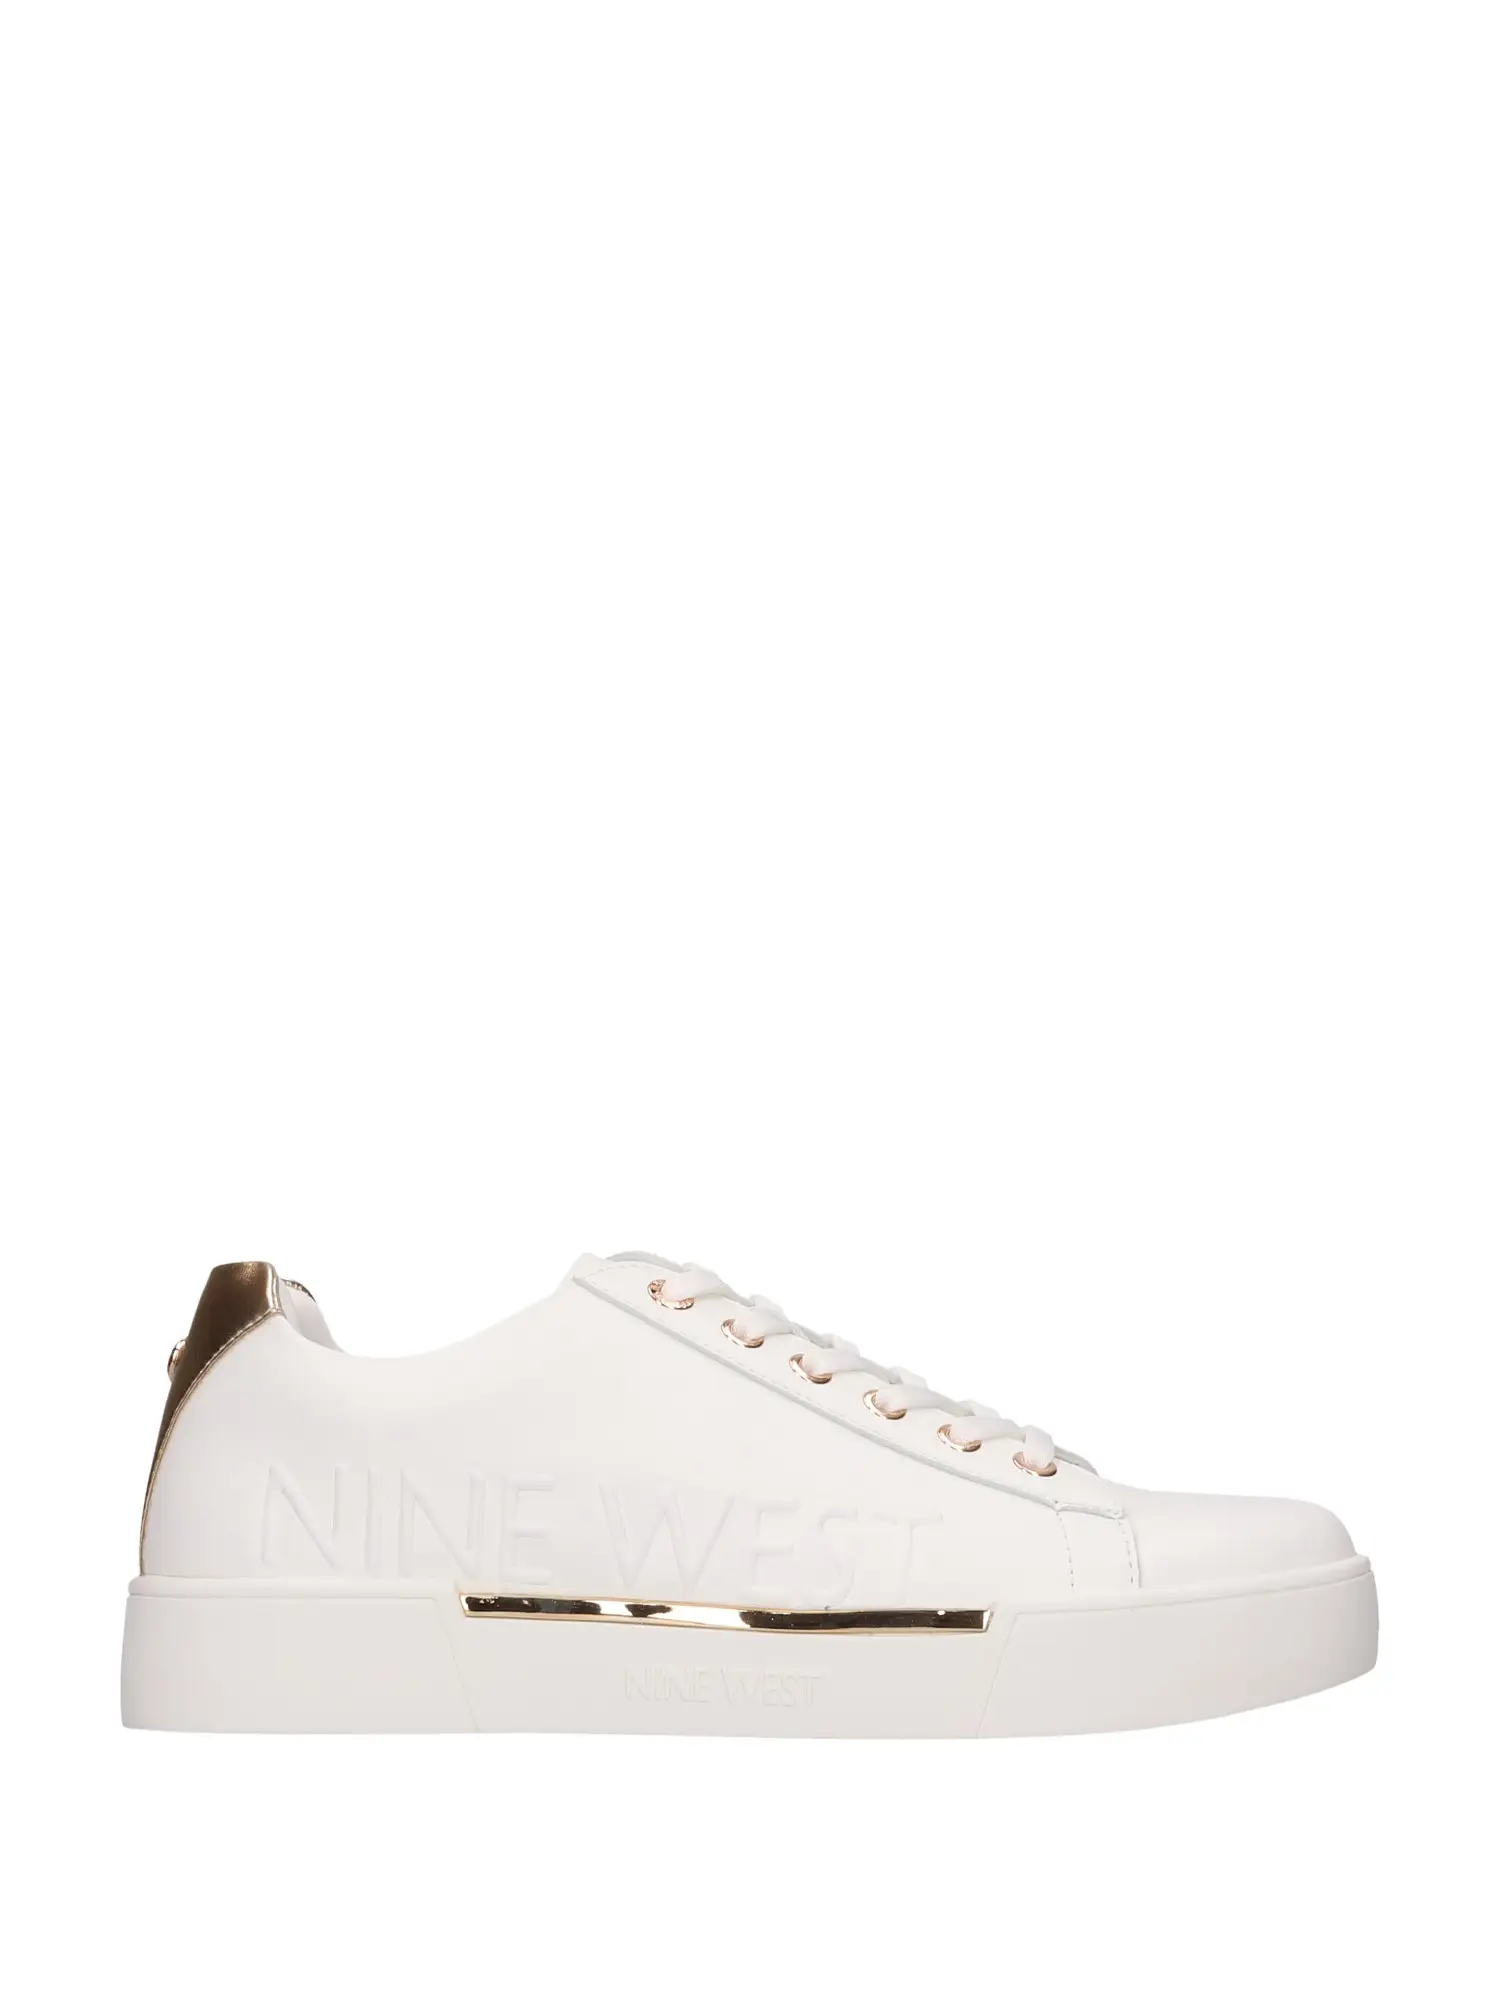 SNEAKERS DONNA - NINE WEST - 101484811 S16 - BIANCO, 41